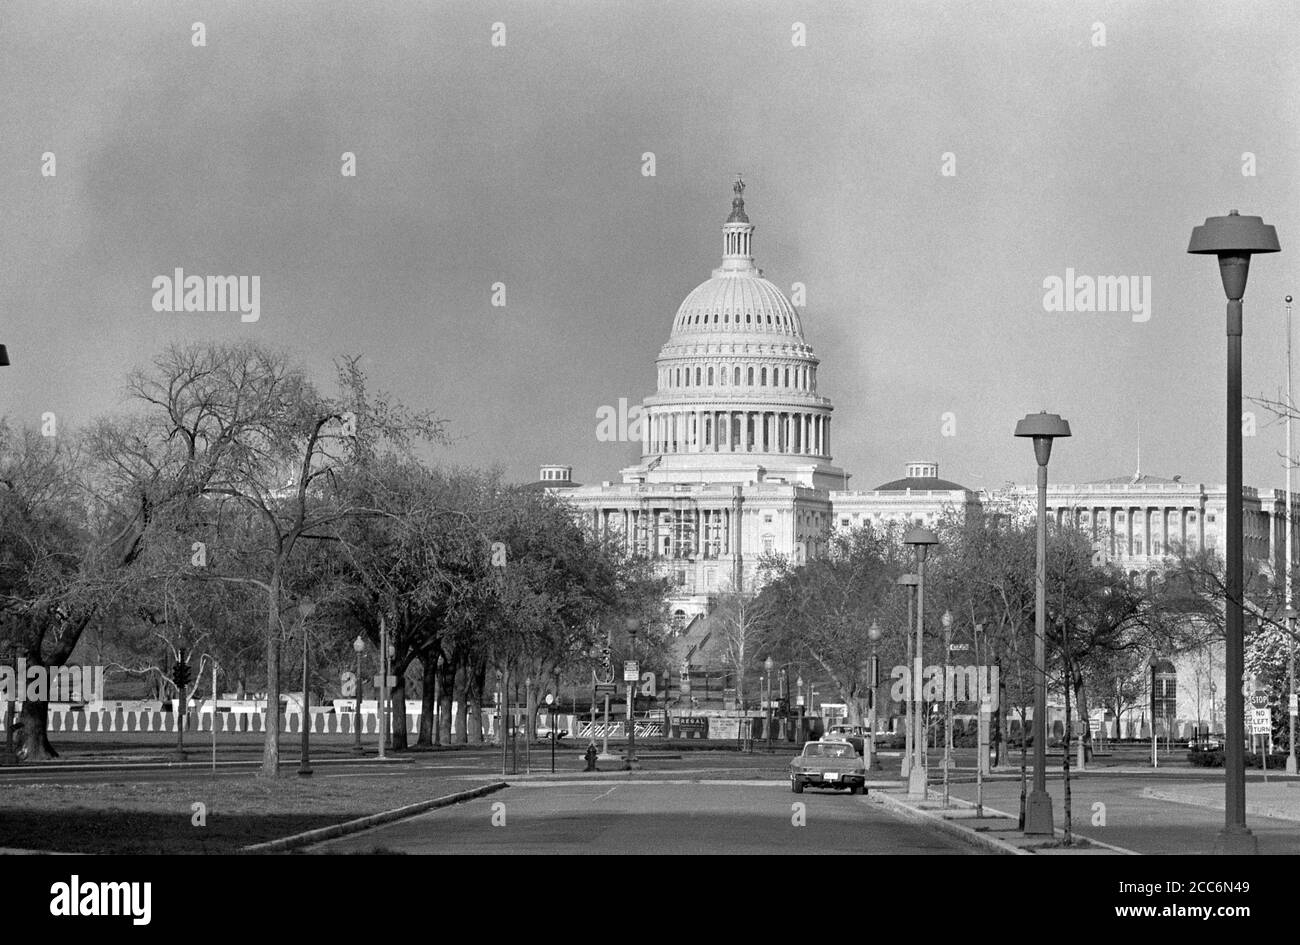 Smoke rising near U.S. Capitol Building during Riots following Dr. Martin Luther King Jr's, Assassination, Washington, D.C., USA, Marion S. Triosko, April 6, 1968 Stock Photo